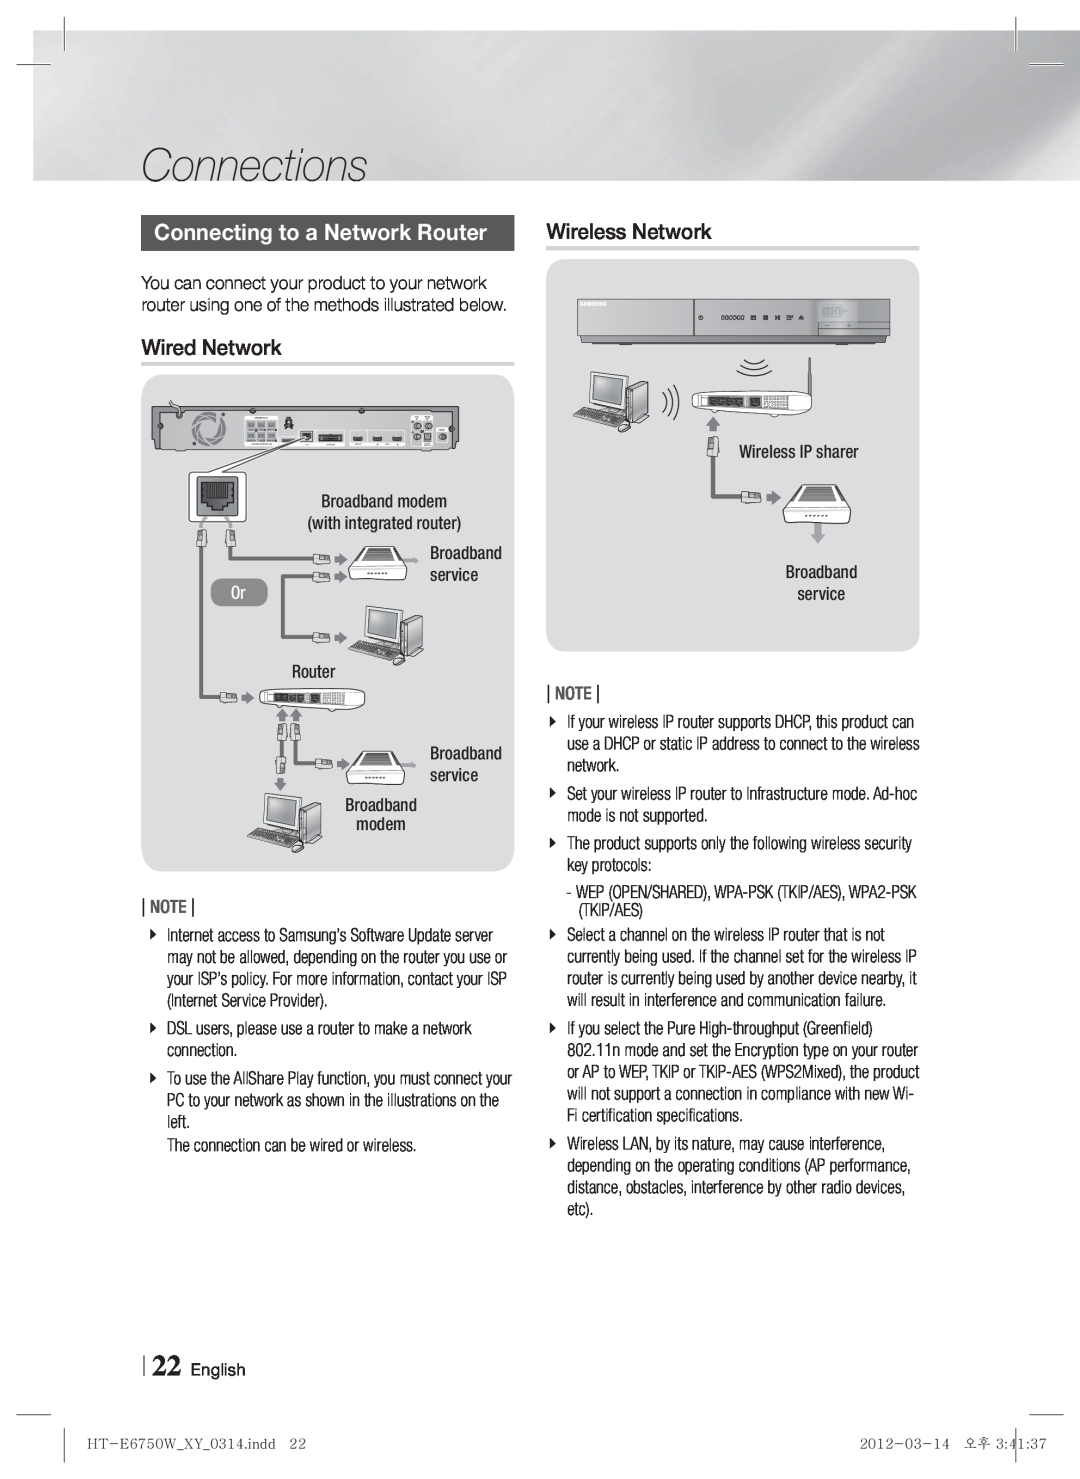 Samsung HT-E6750W user manual Connecting to a Network Router, Wireless Network, Connections, Note 